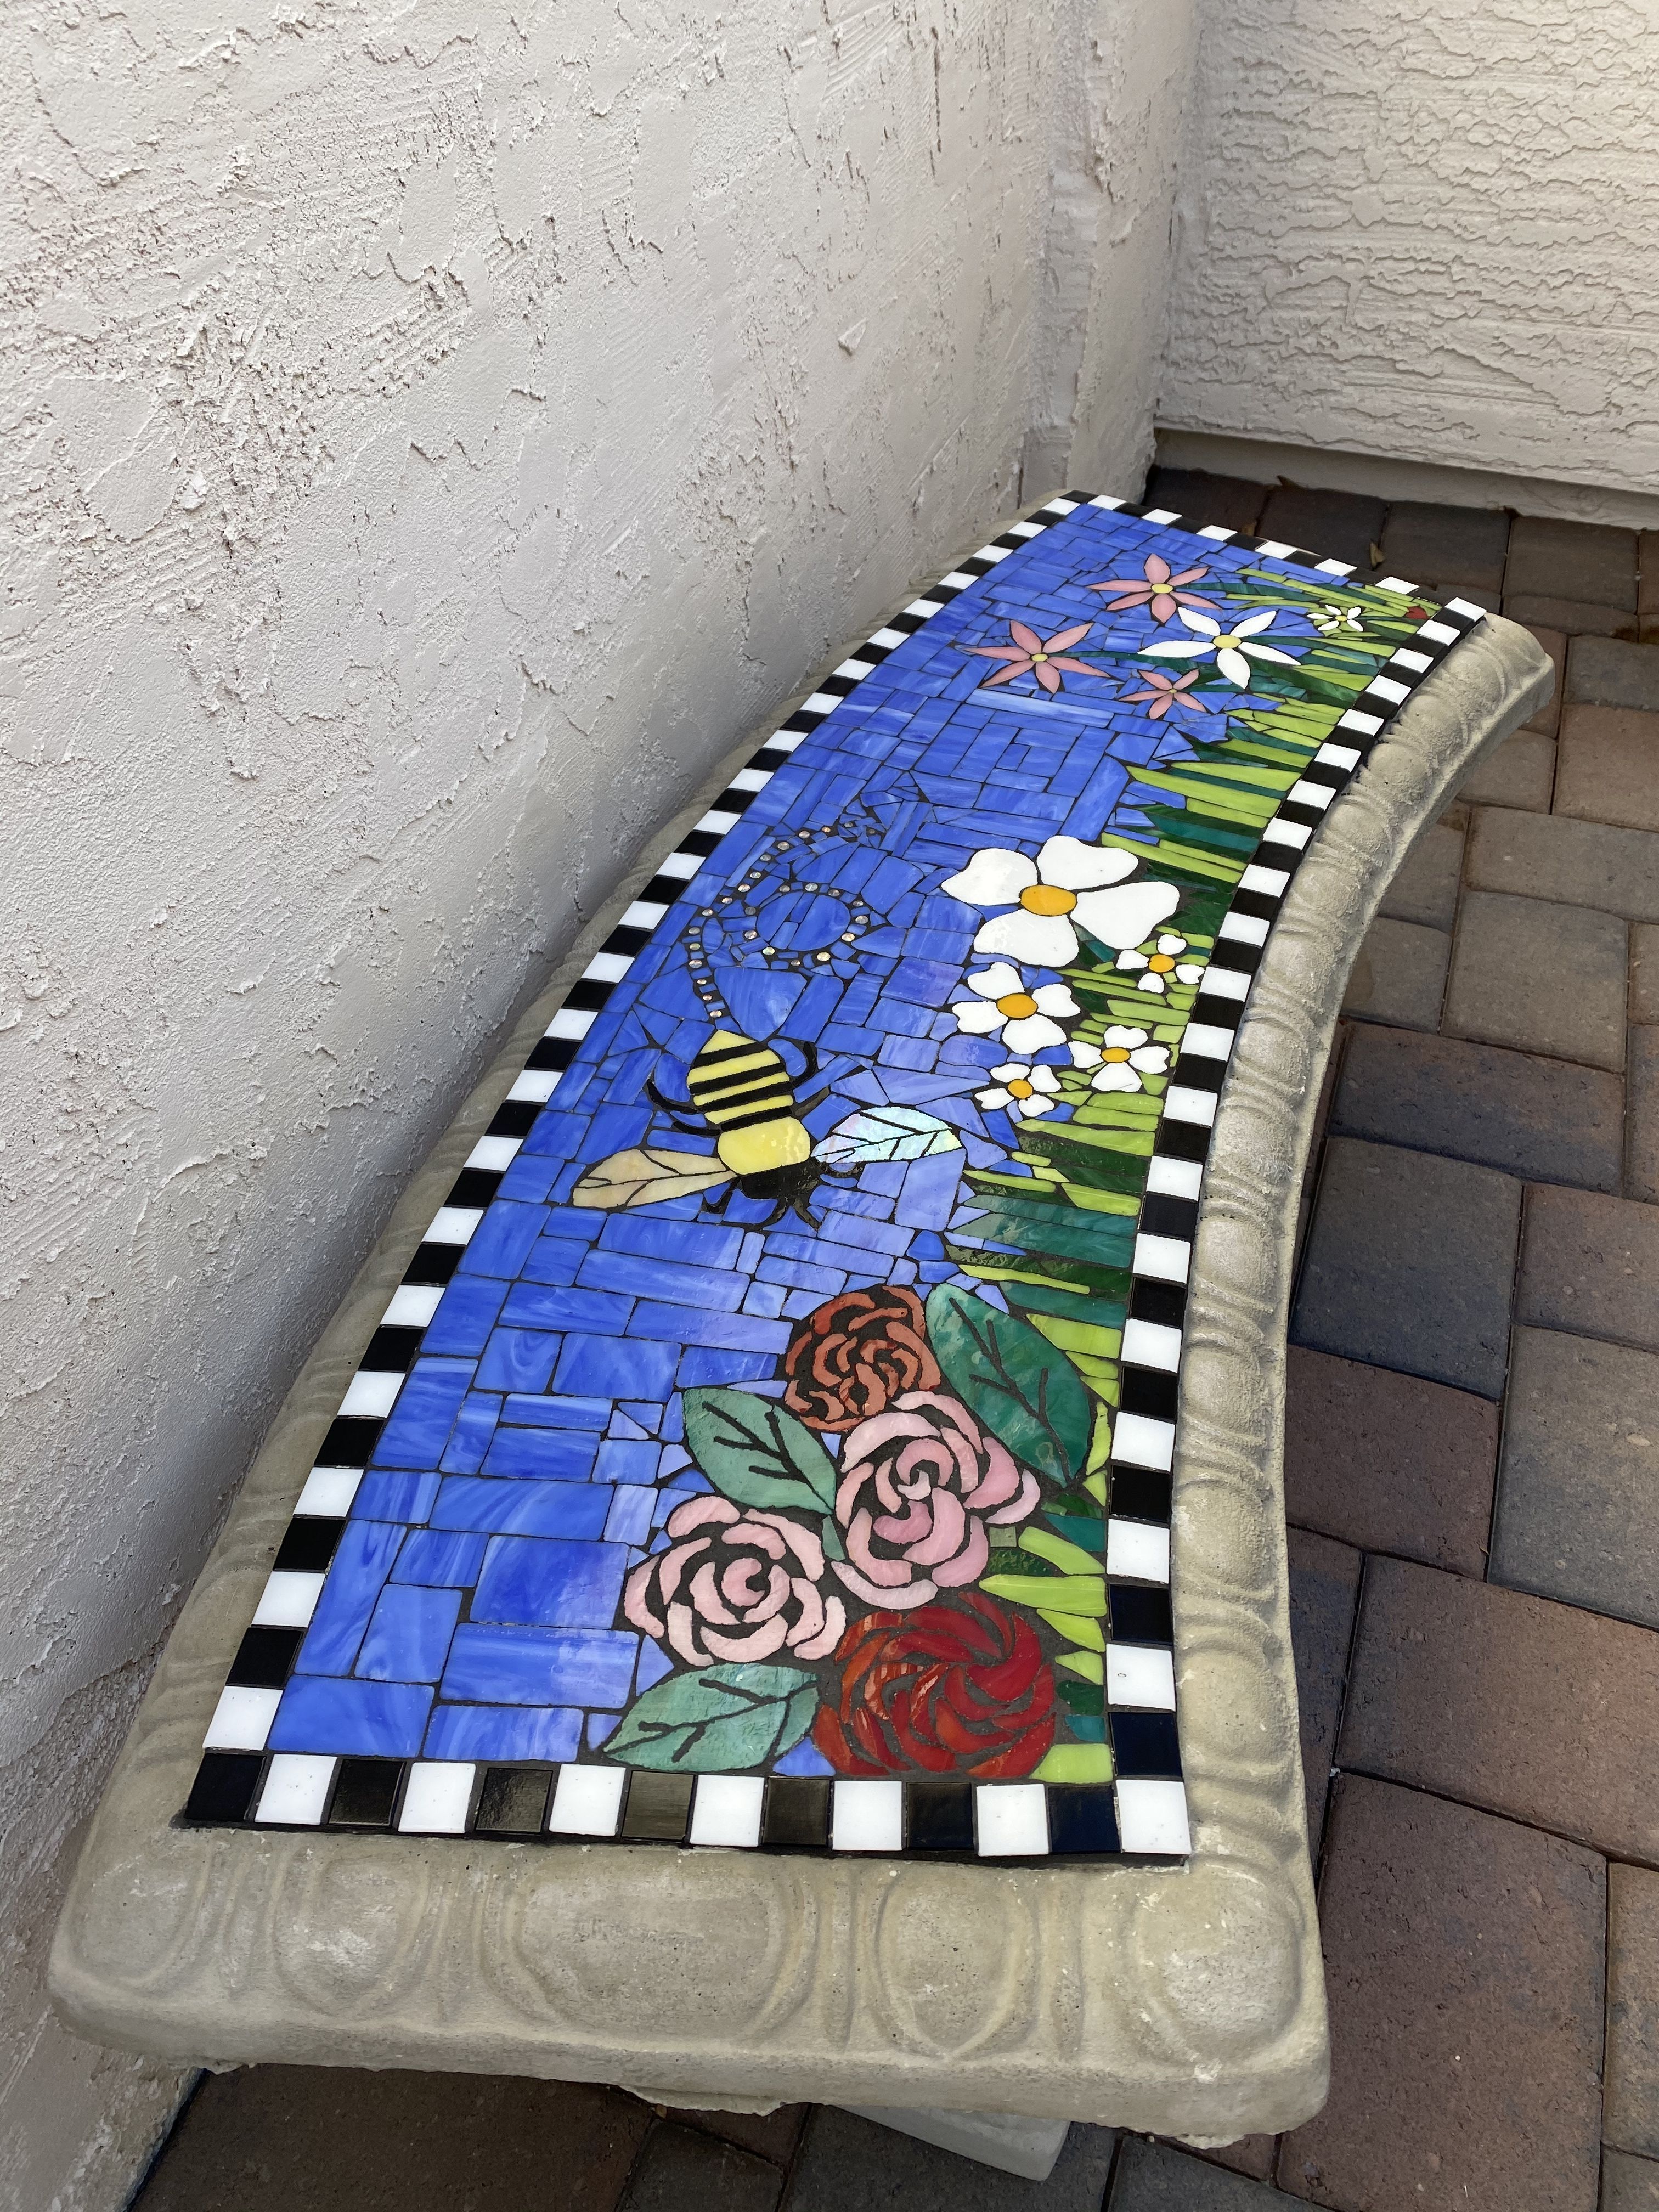 Stained Glass Mosaic Garden Bench